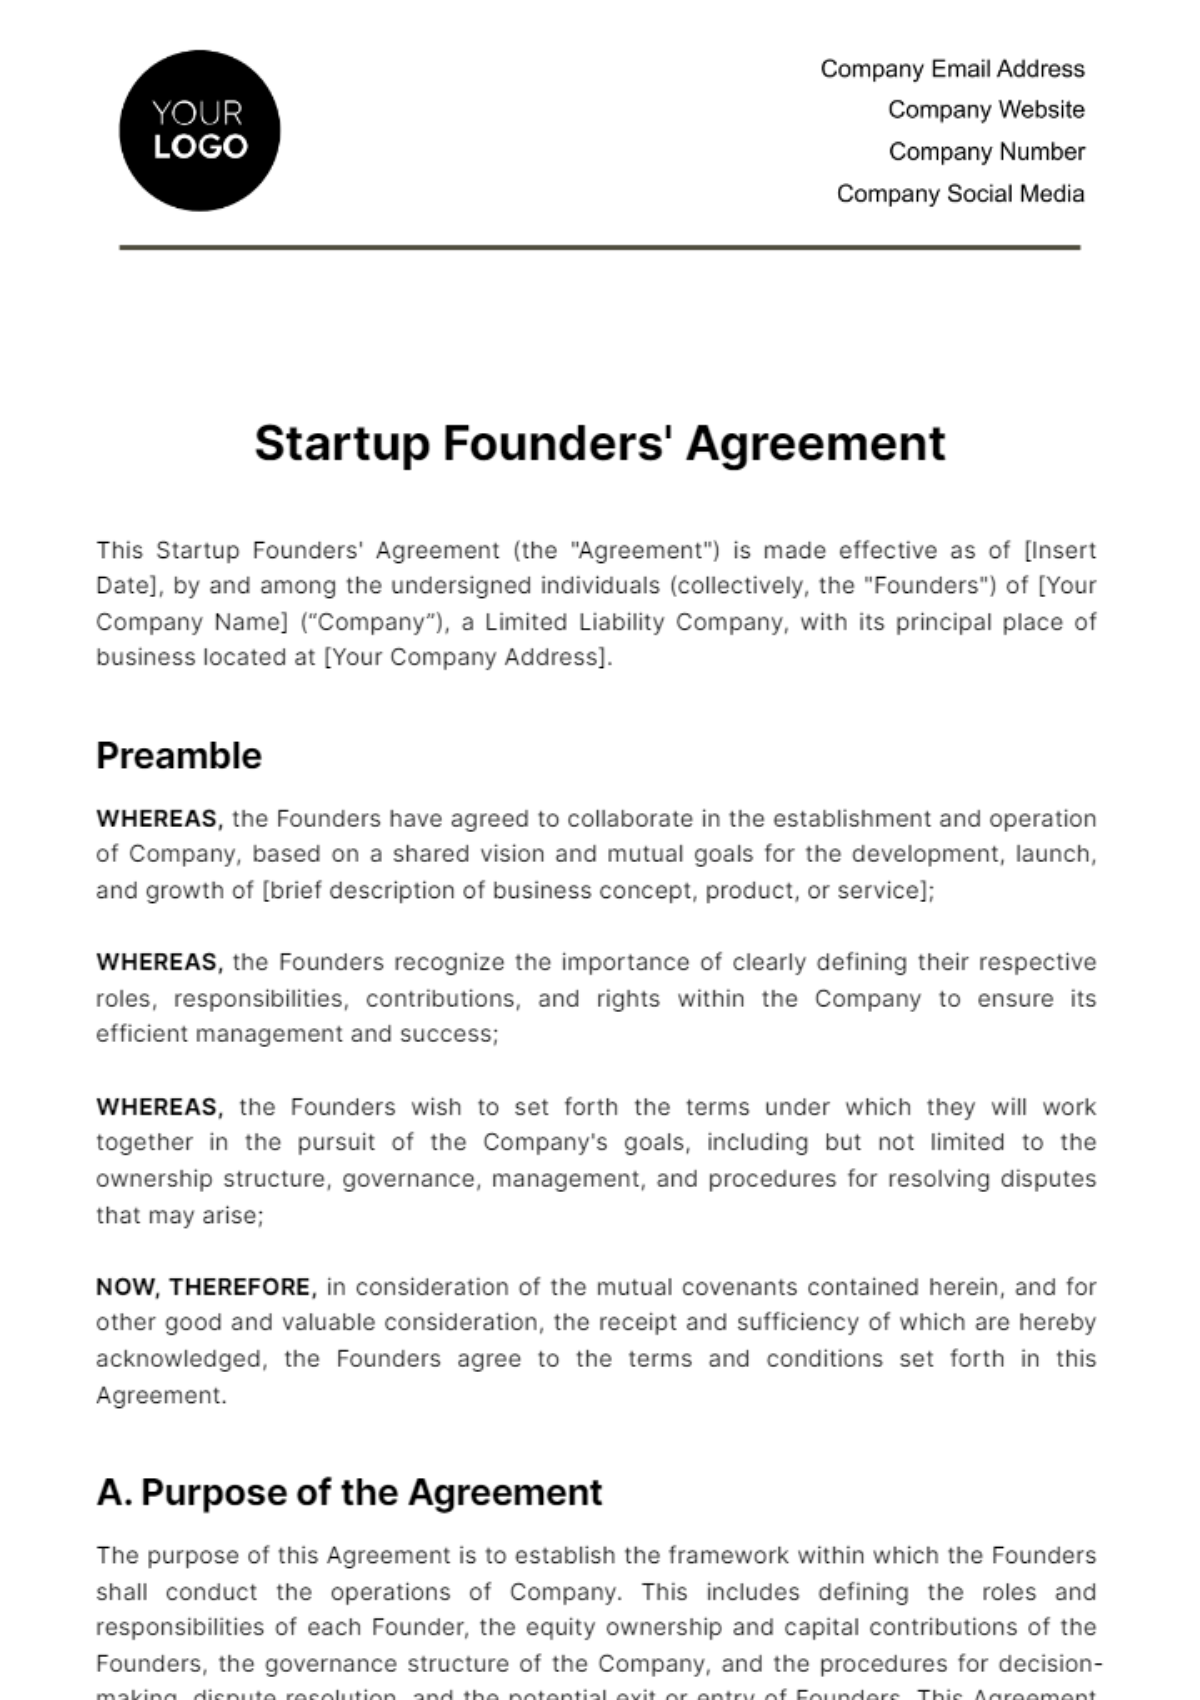 Startup Founders' Agreement Template